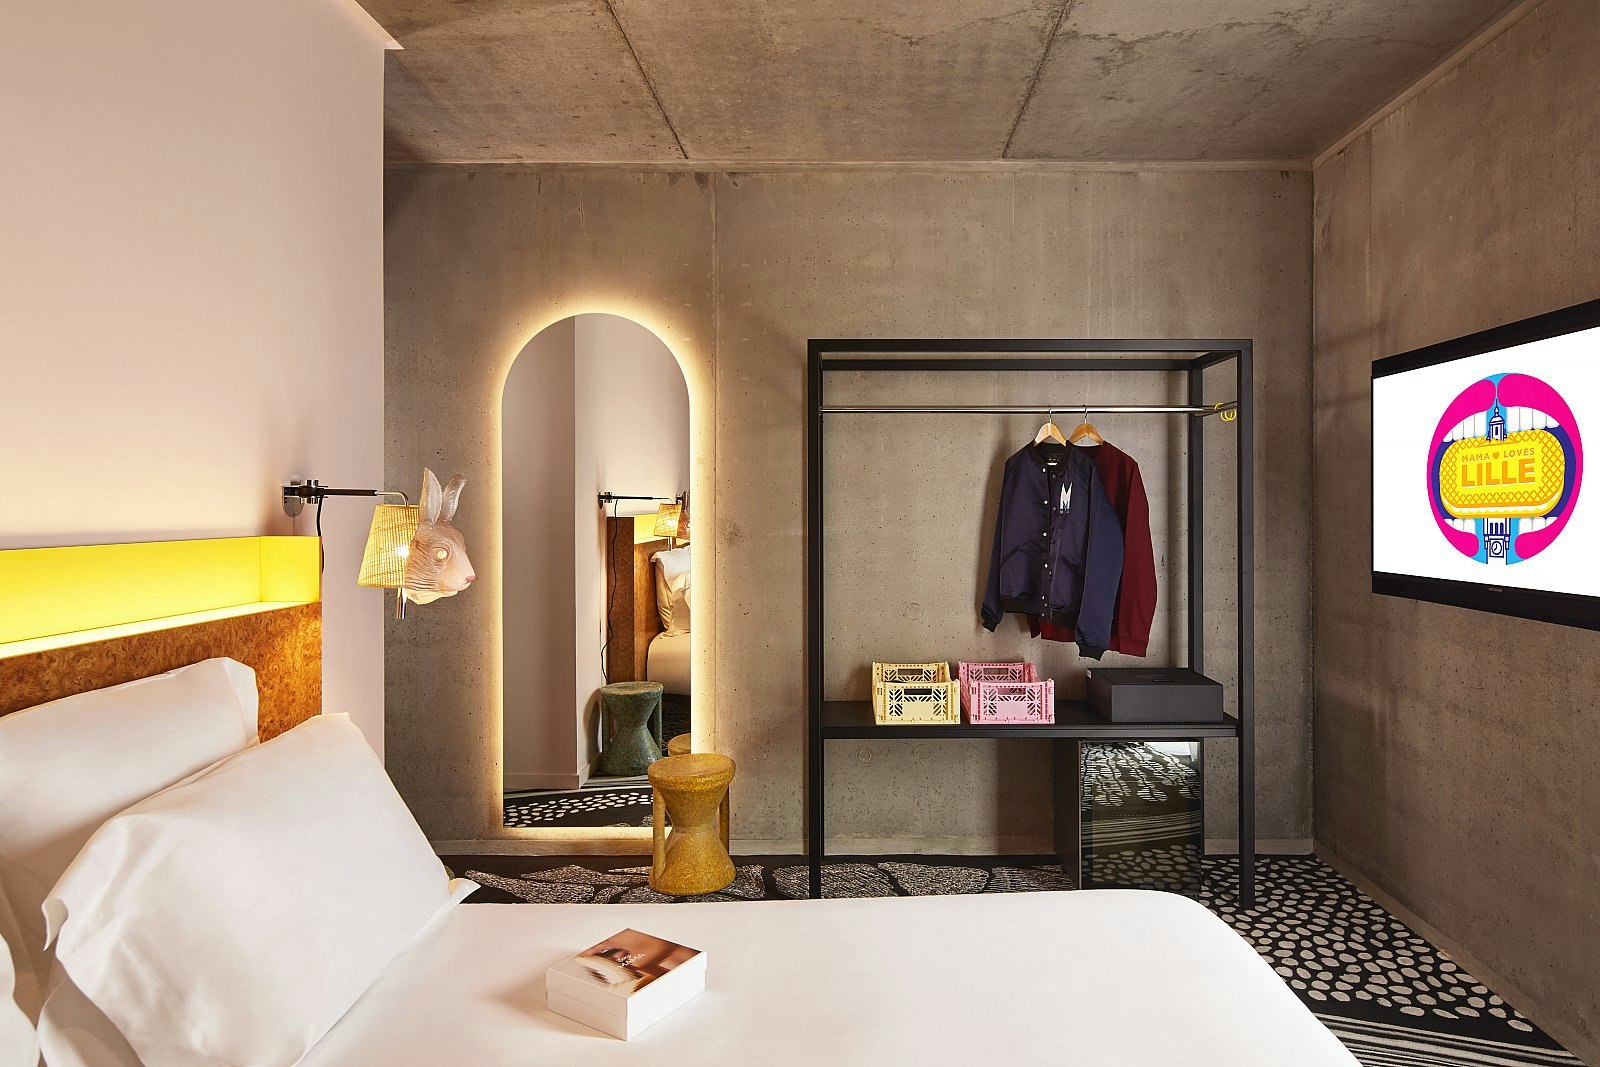 A bedroom at the Mama Shelter Lille hotel: walls have an exposed concrete finish; the bed has white linen and a wooden headboard; there is a plastic rabbit mask over the bedside light.